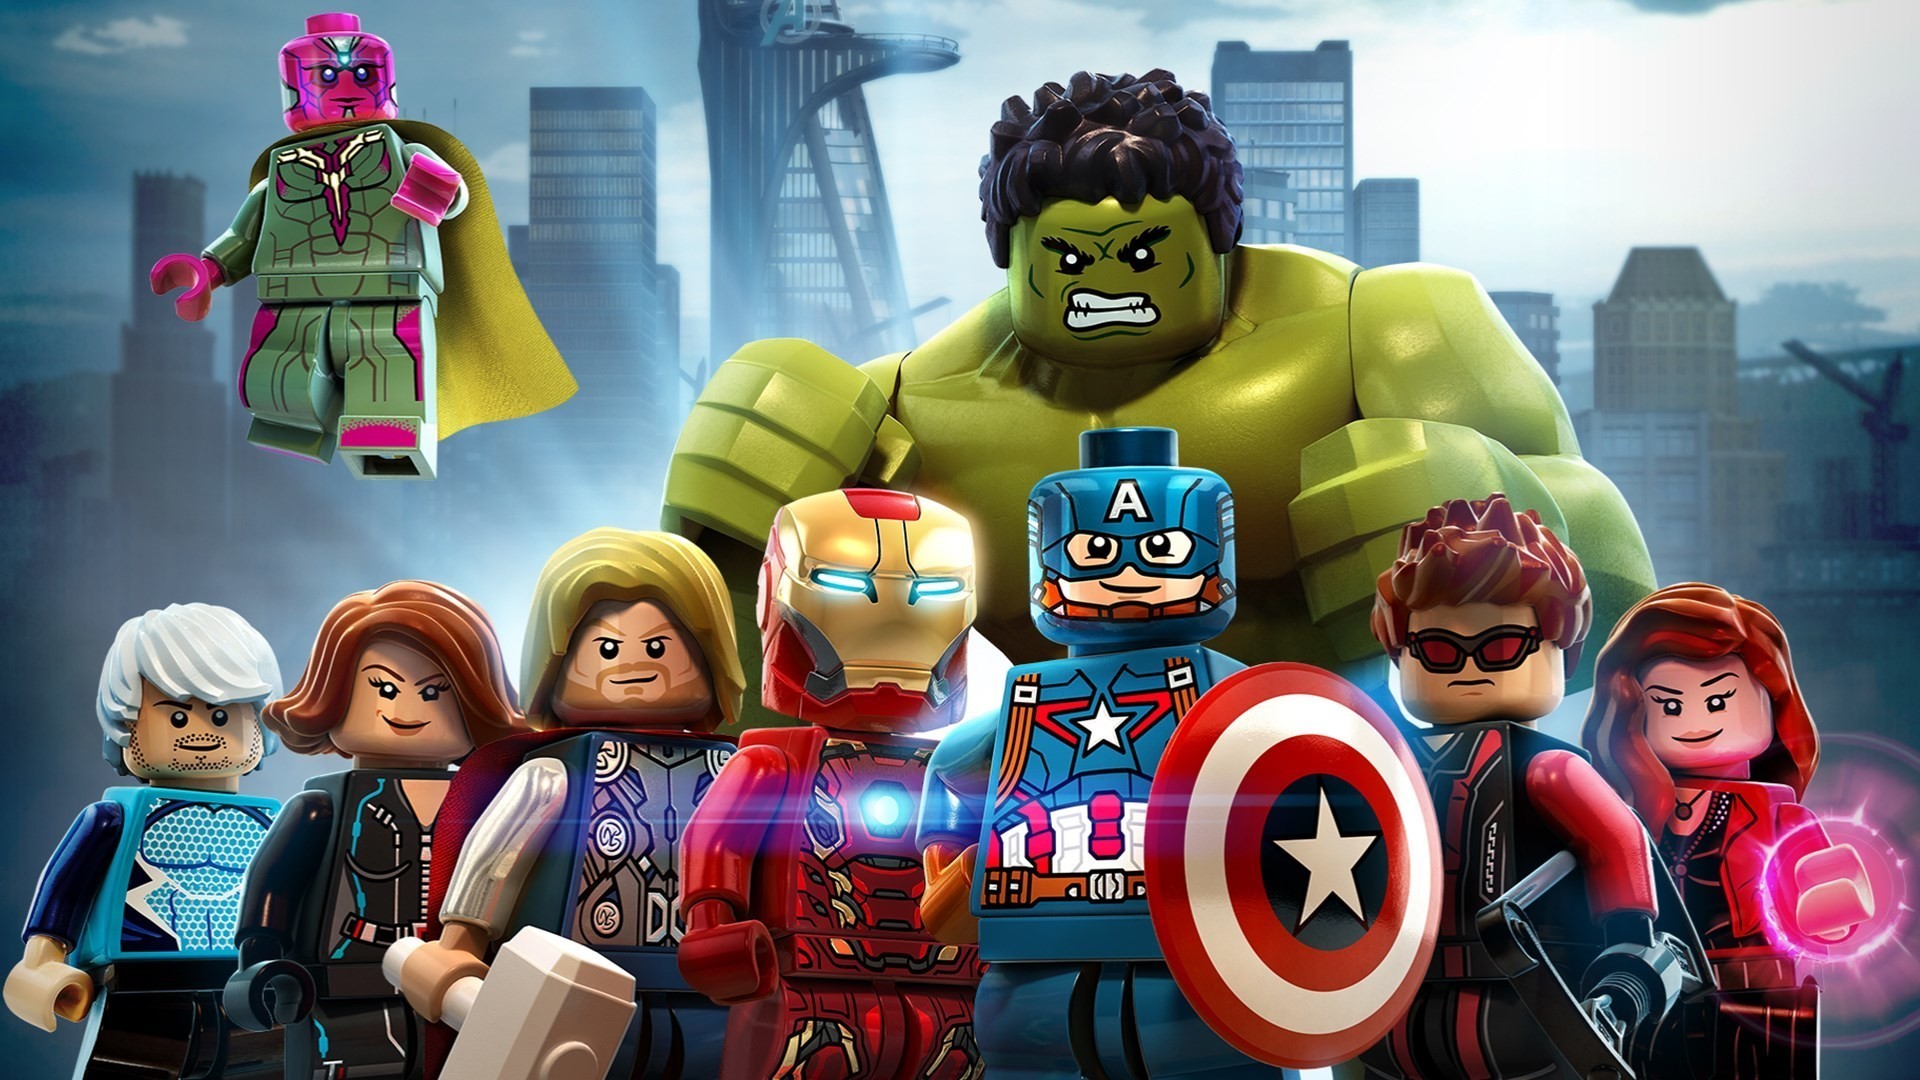 1920x1080 2560x1440 LEGO Marvel Super Heroes HD Wallpapers